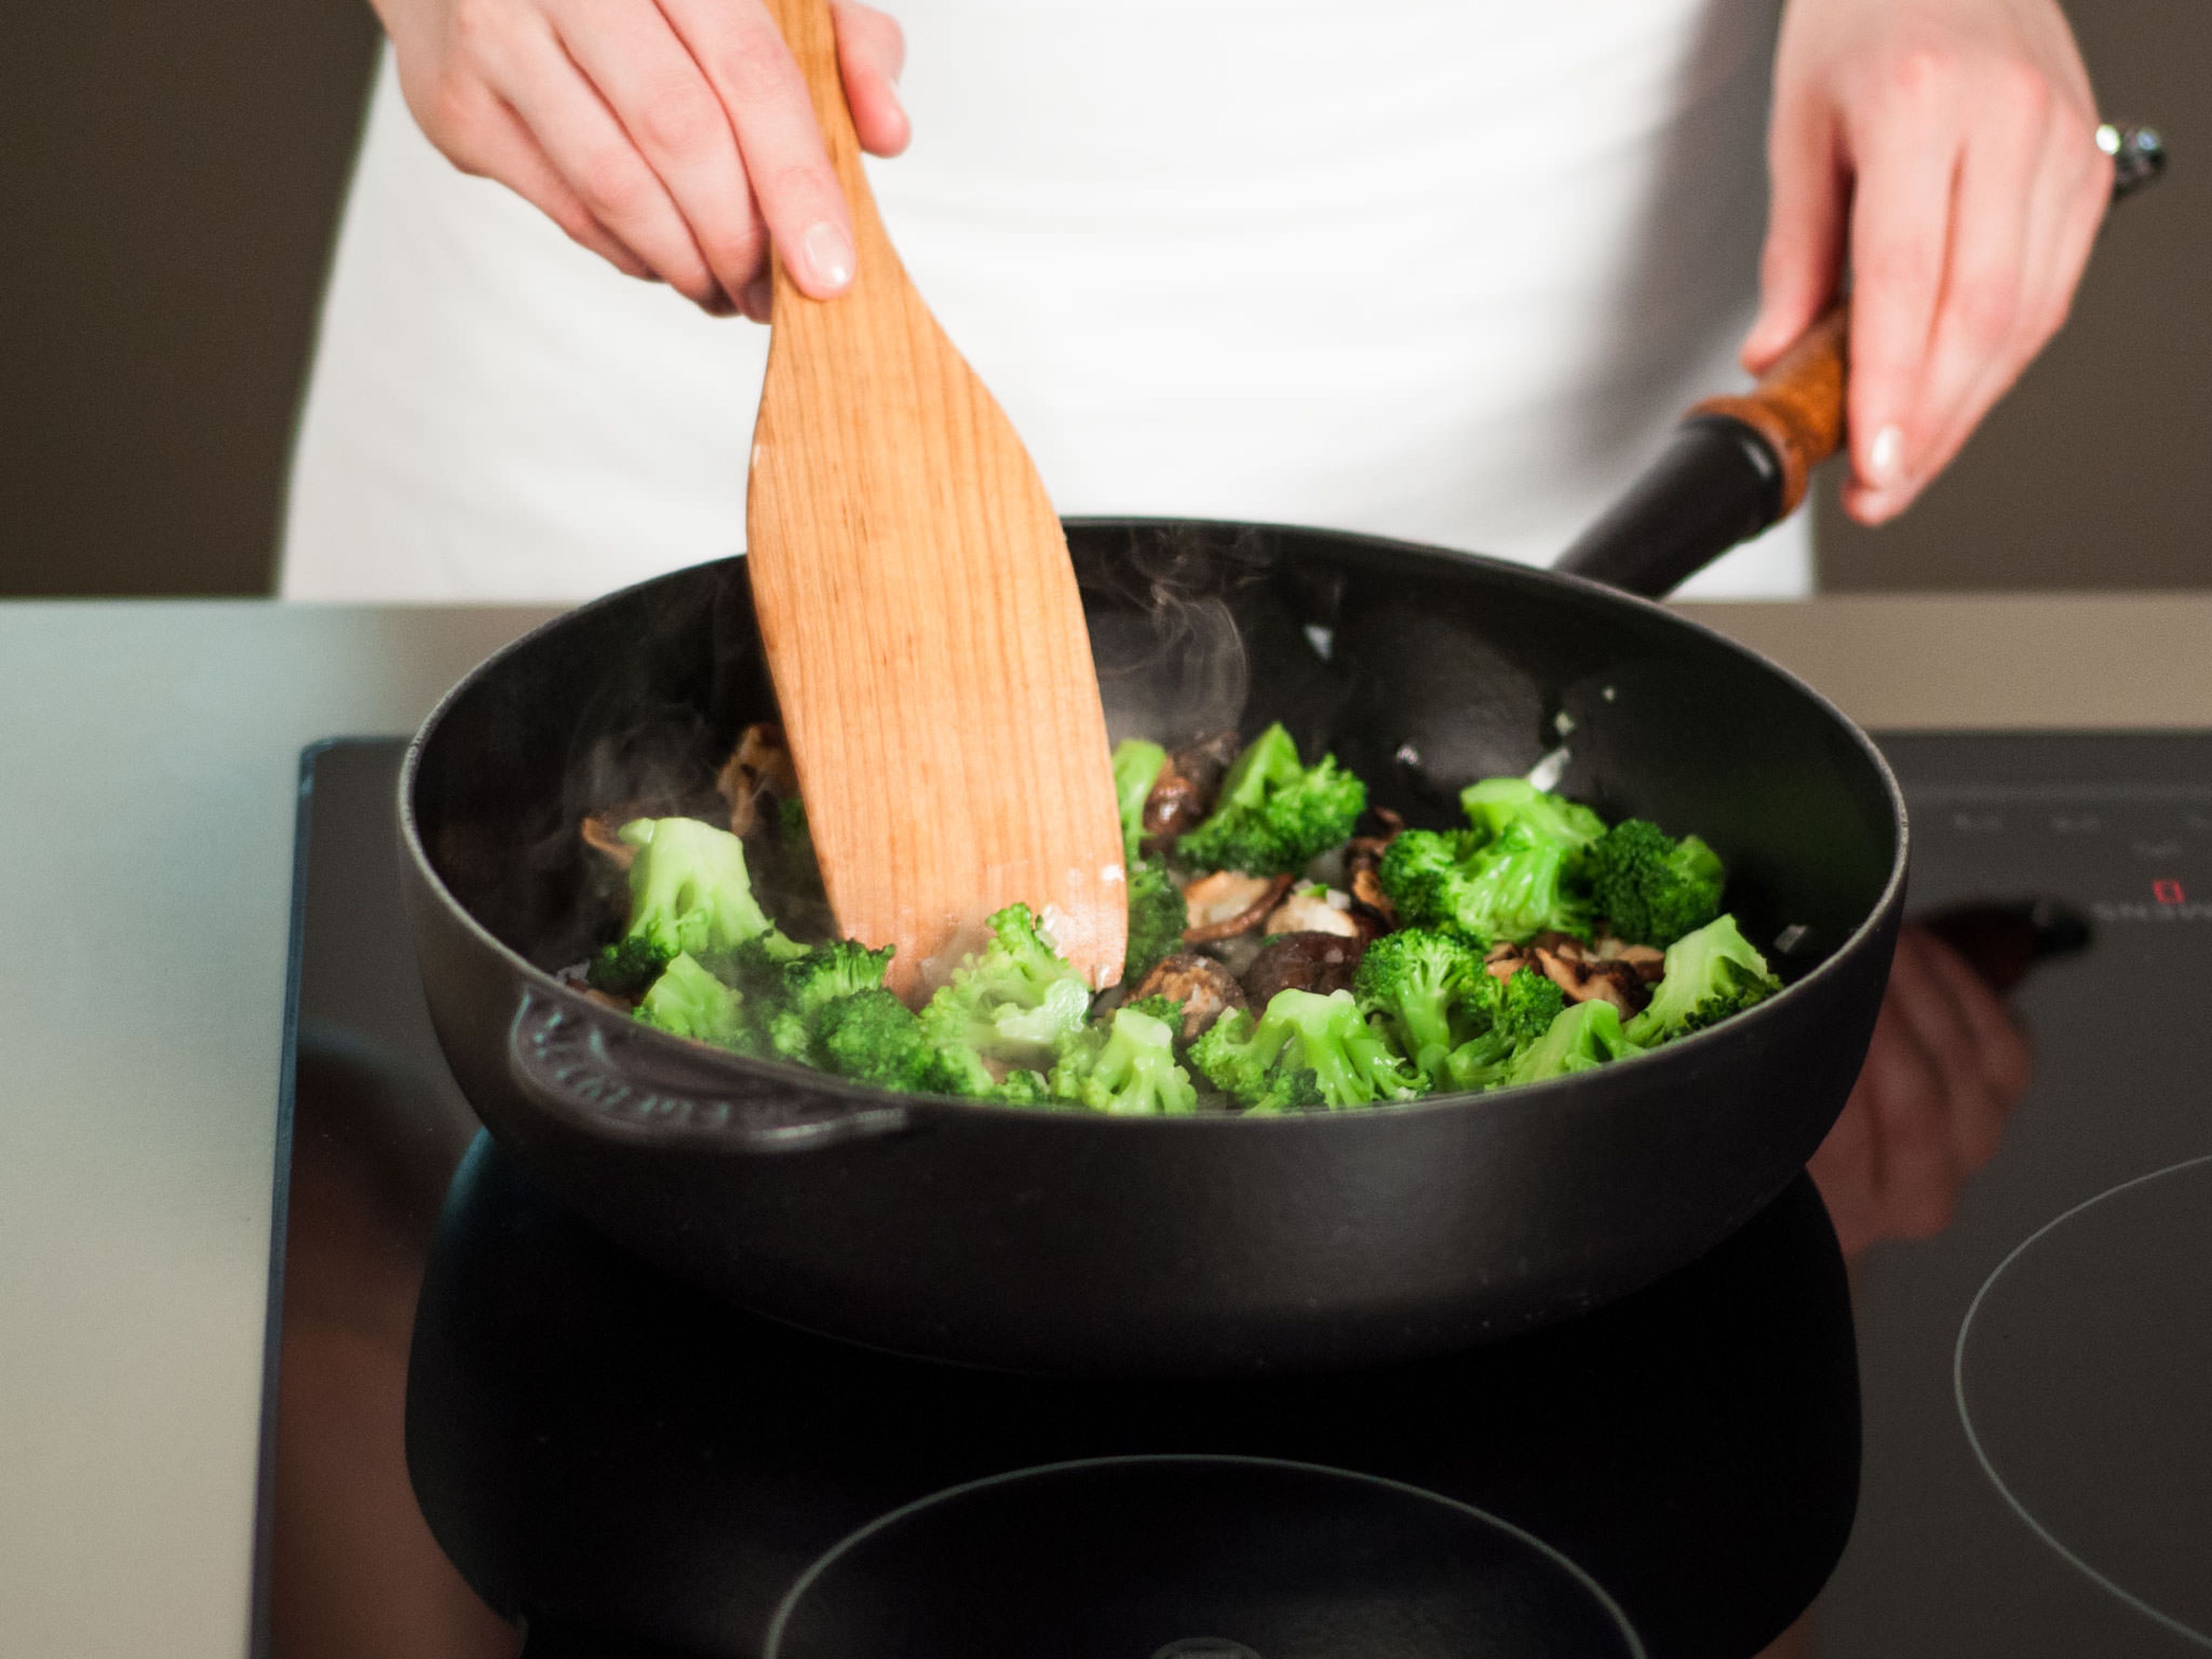 In a frying pan, sauté mushrooms, broccoli, onion and garlic  in some vegetable oil over medium heat for approx. 3 – 5 min.